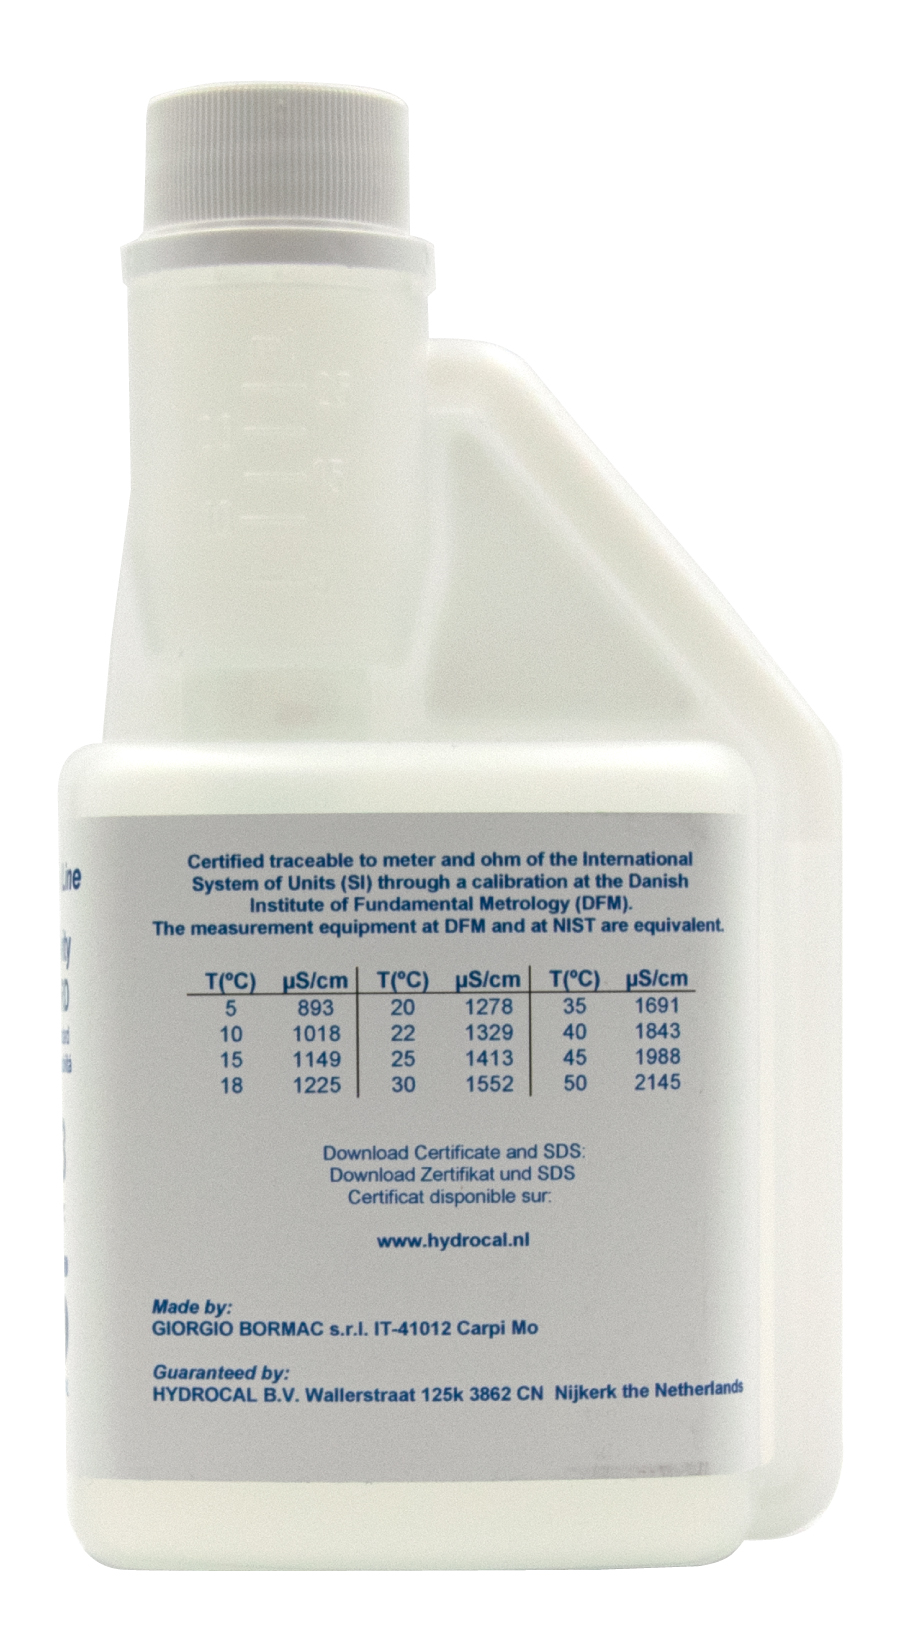 XS Professional 1413µS/cm - 250ml conductivity calibration solution with DFM certificate